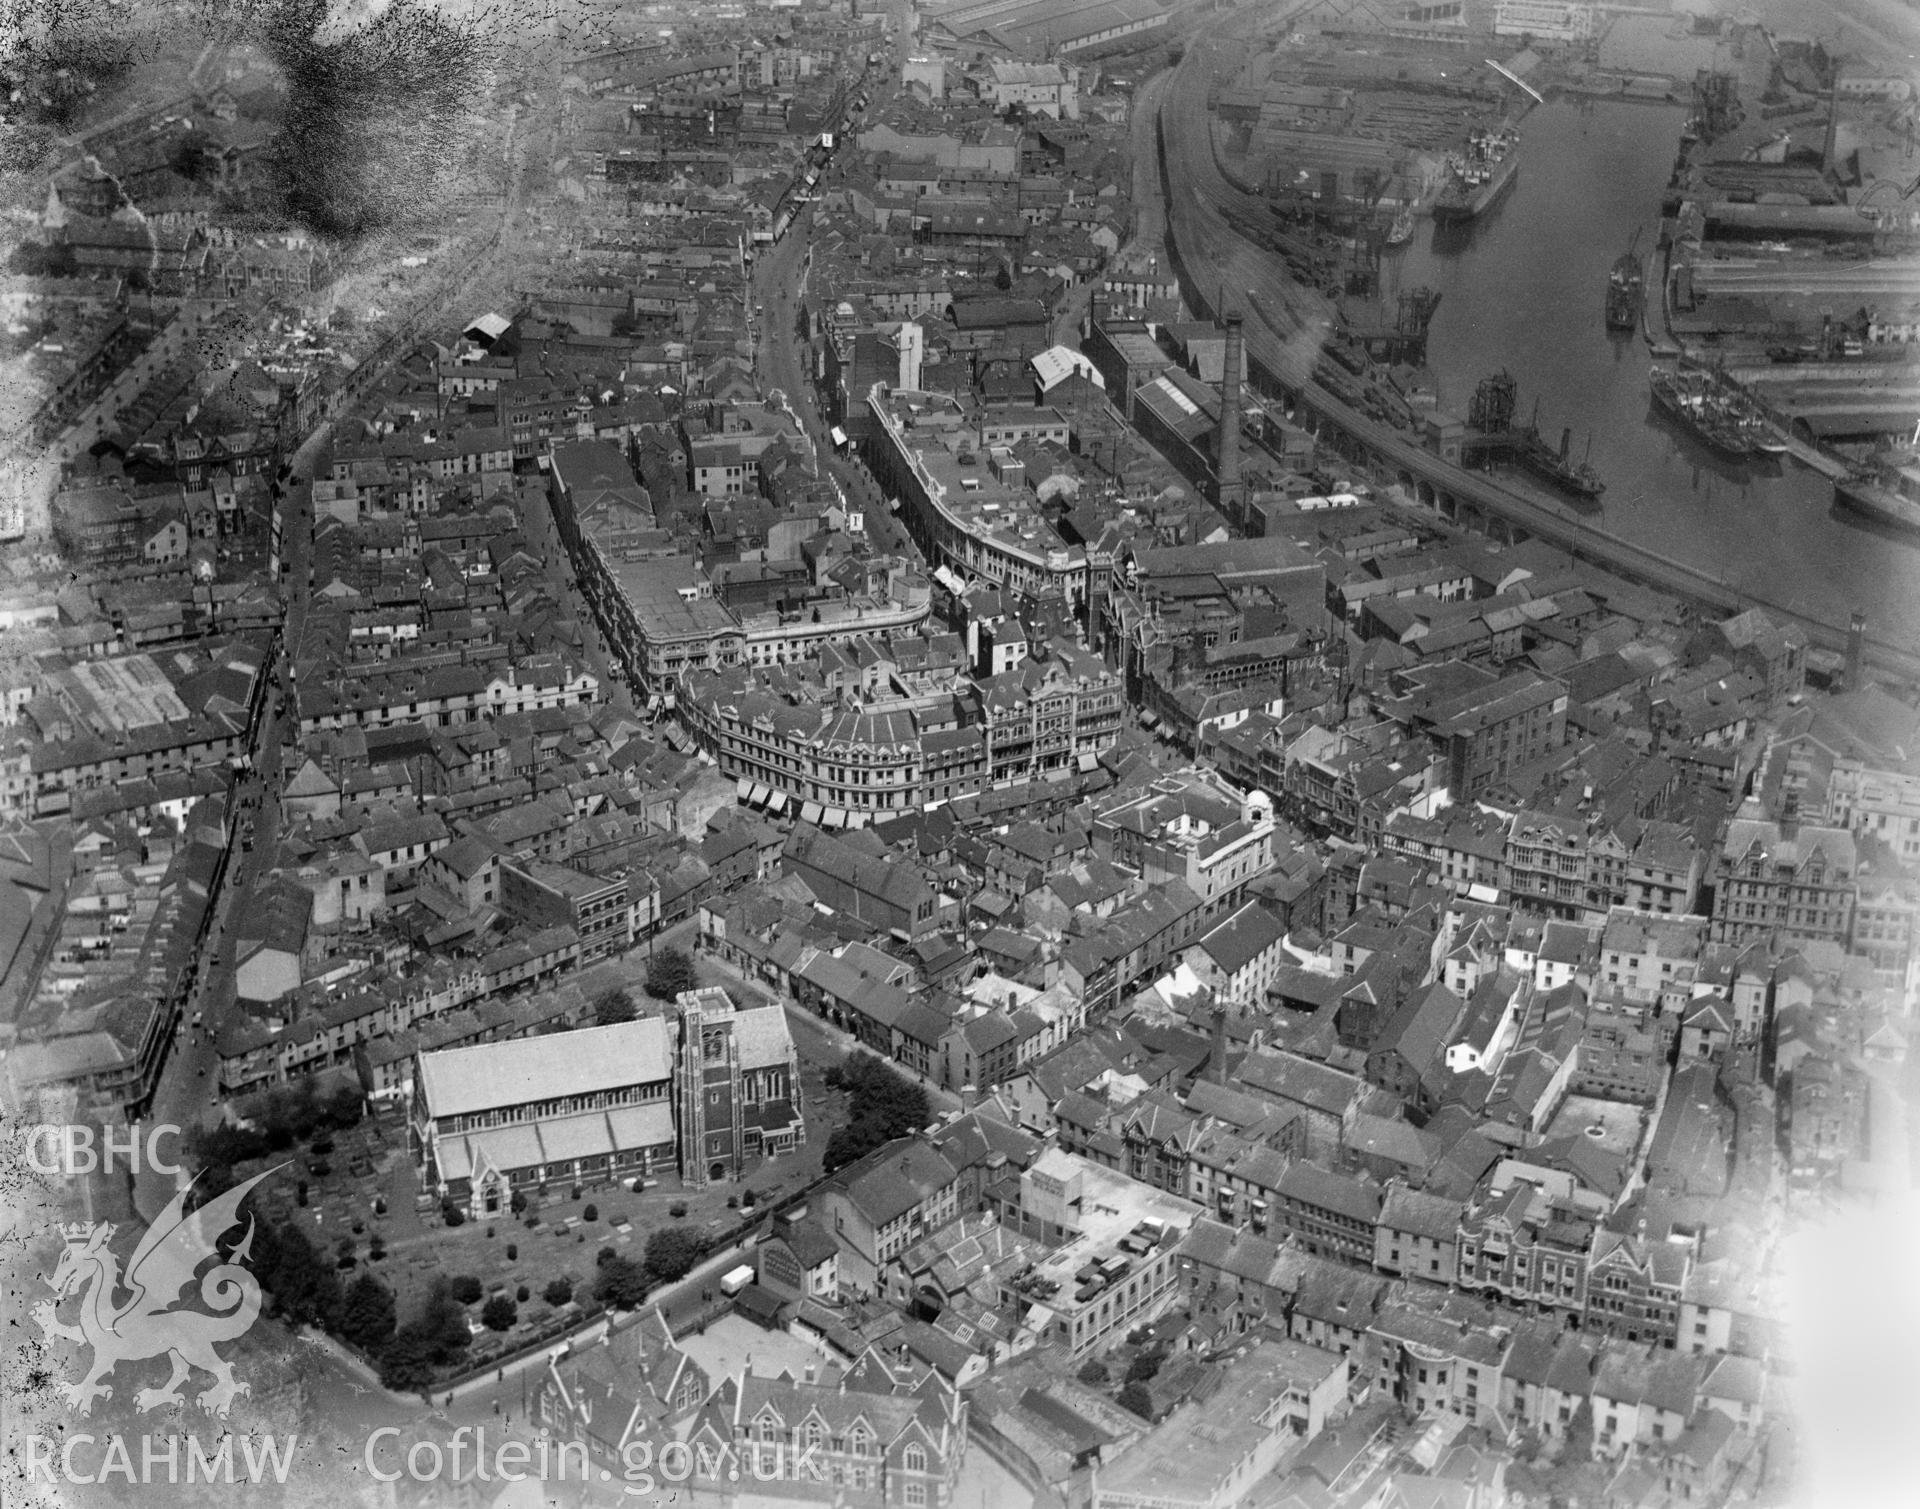 General view of Swansea showing St Mary's church and docks, oblique aerial view. 5?x4? black and white glass plate negative.